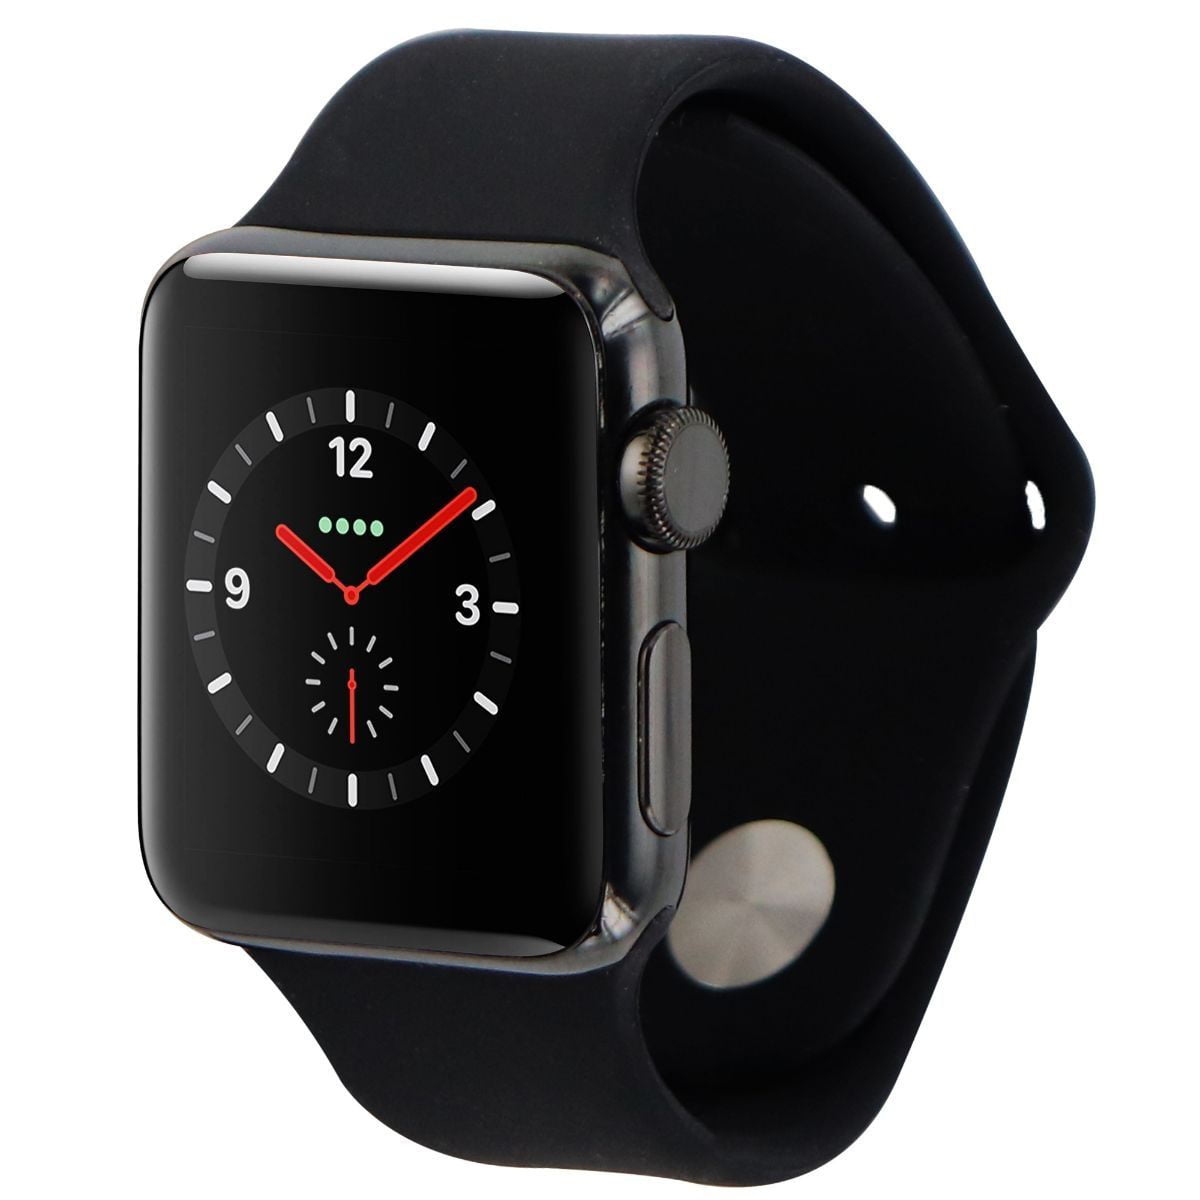 Apple - Apple Watch Series 3 (A1860) GPS+LTE 38mm Space Black Stainless Black Stainless Steel Apple Watch